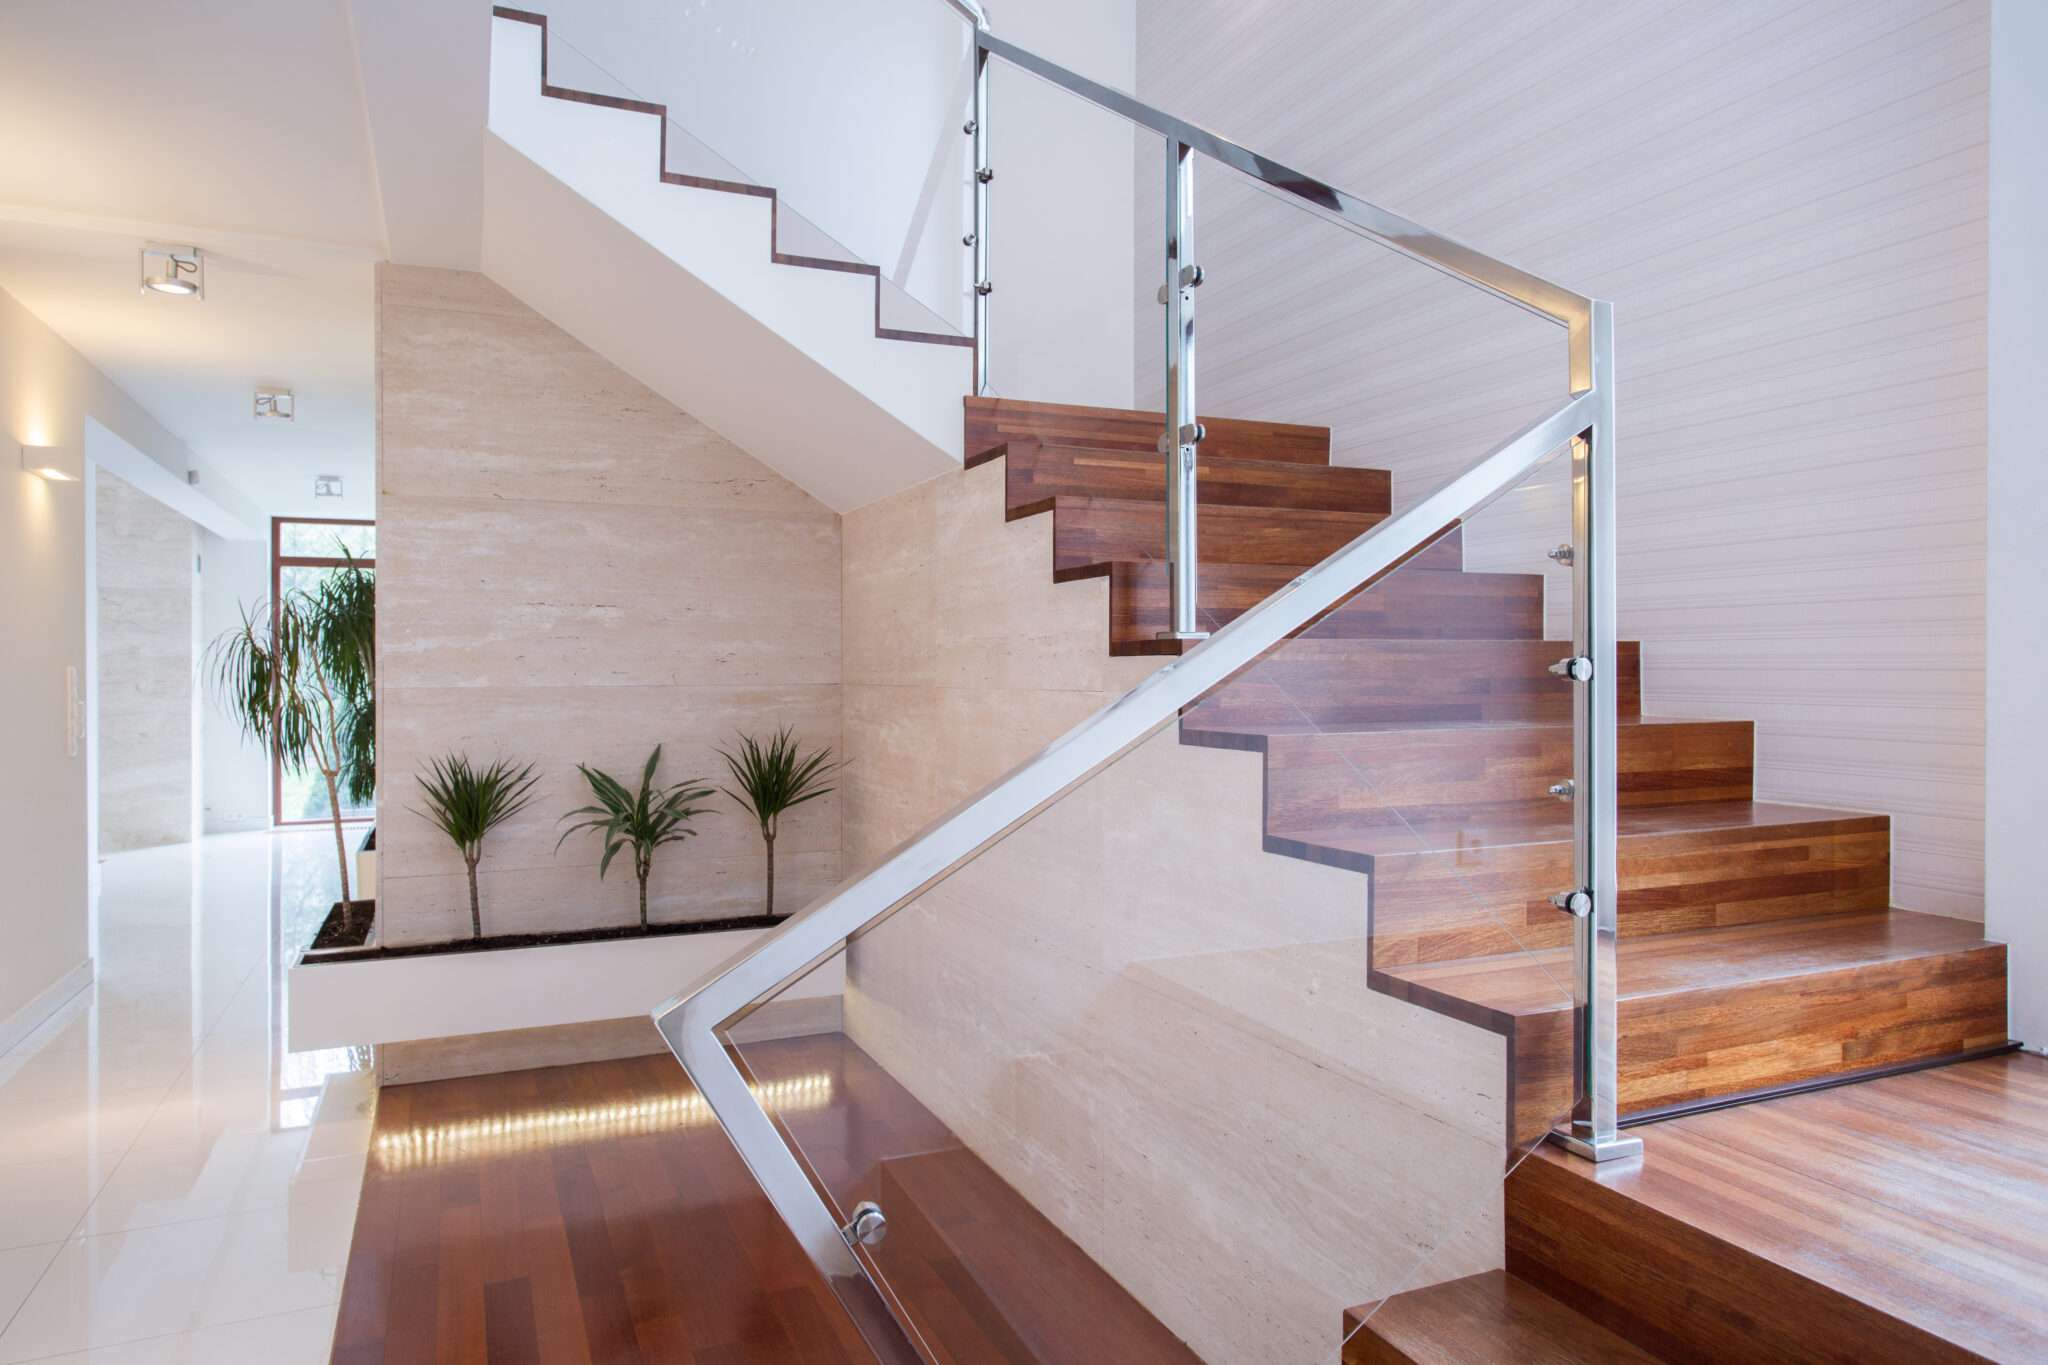 Glass railing with wood handrail on stairs